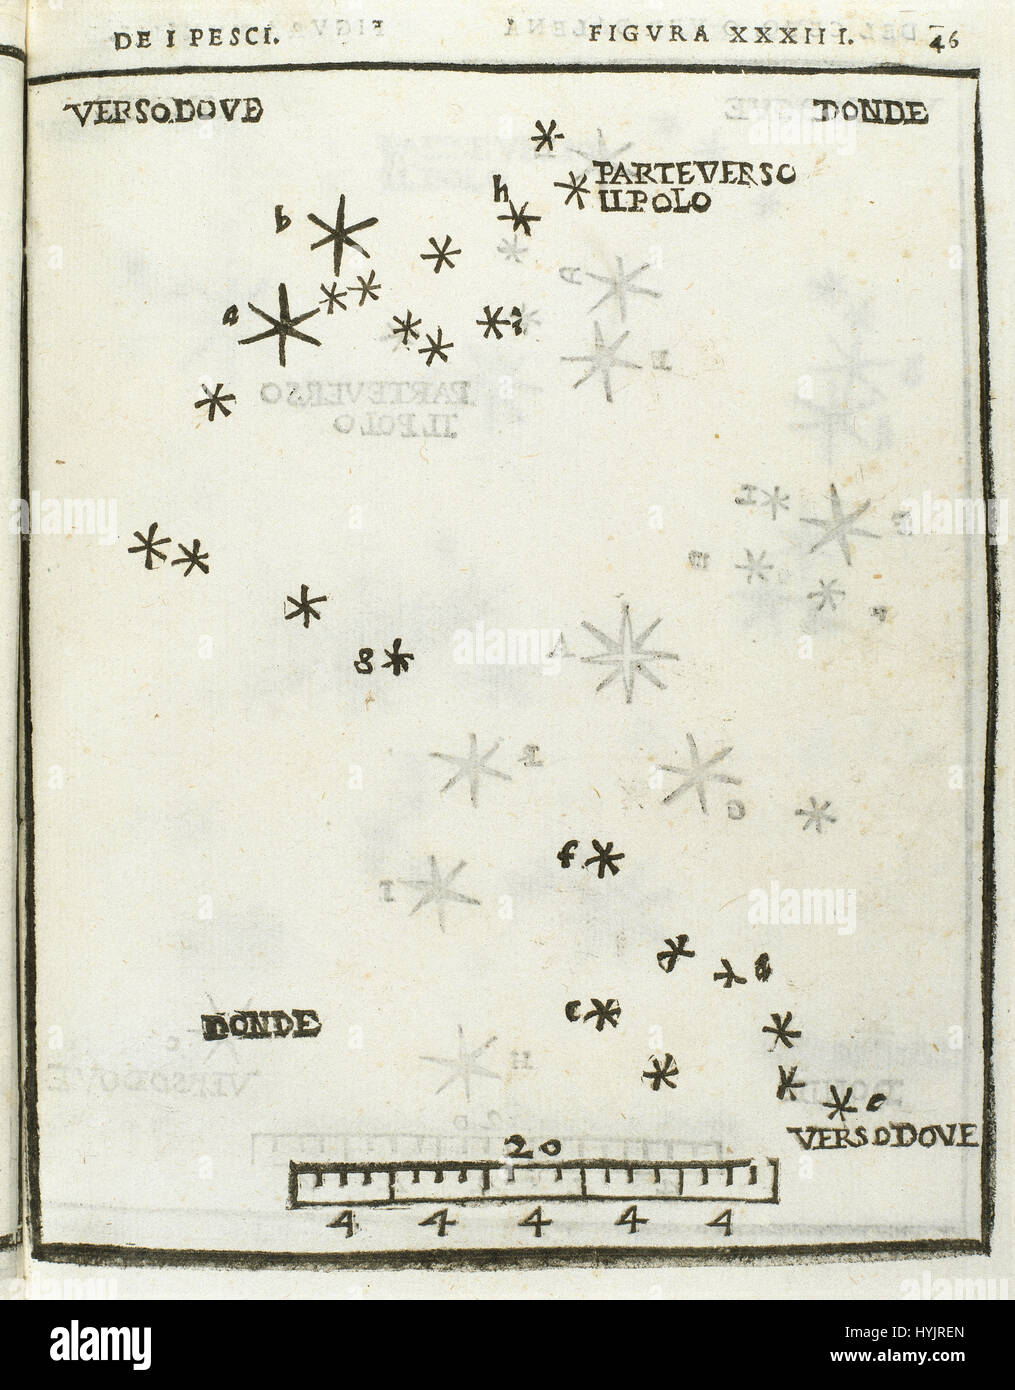 Pisces (Dei Pesci). Engraving depicting the structure of the constellation, 1559. Dele Stelle Fisse by Italian humanist Alessandro Piccolomini (1508-1579). Edited in Venice, 1540. Stock Photo